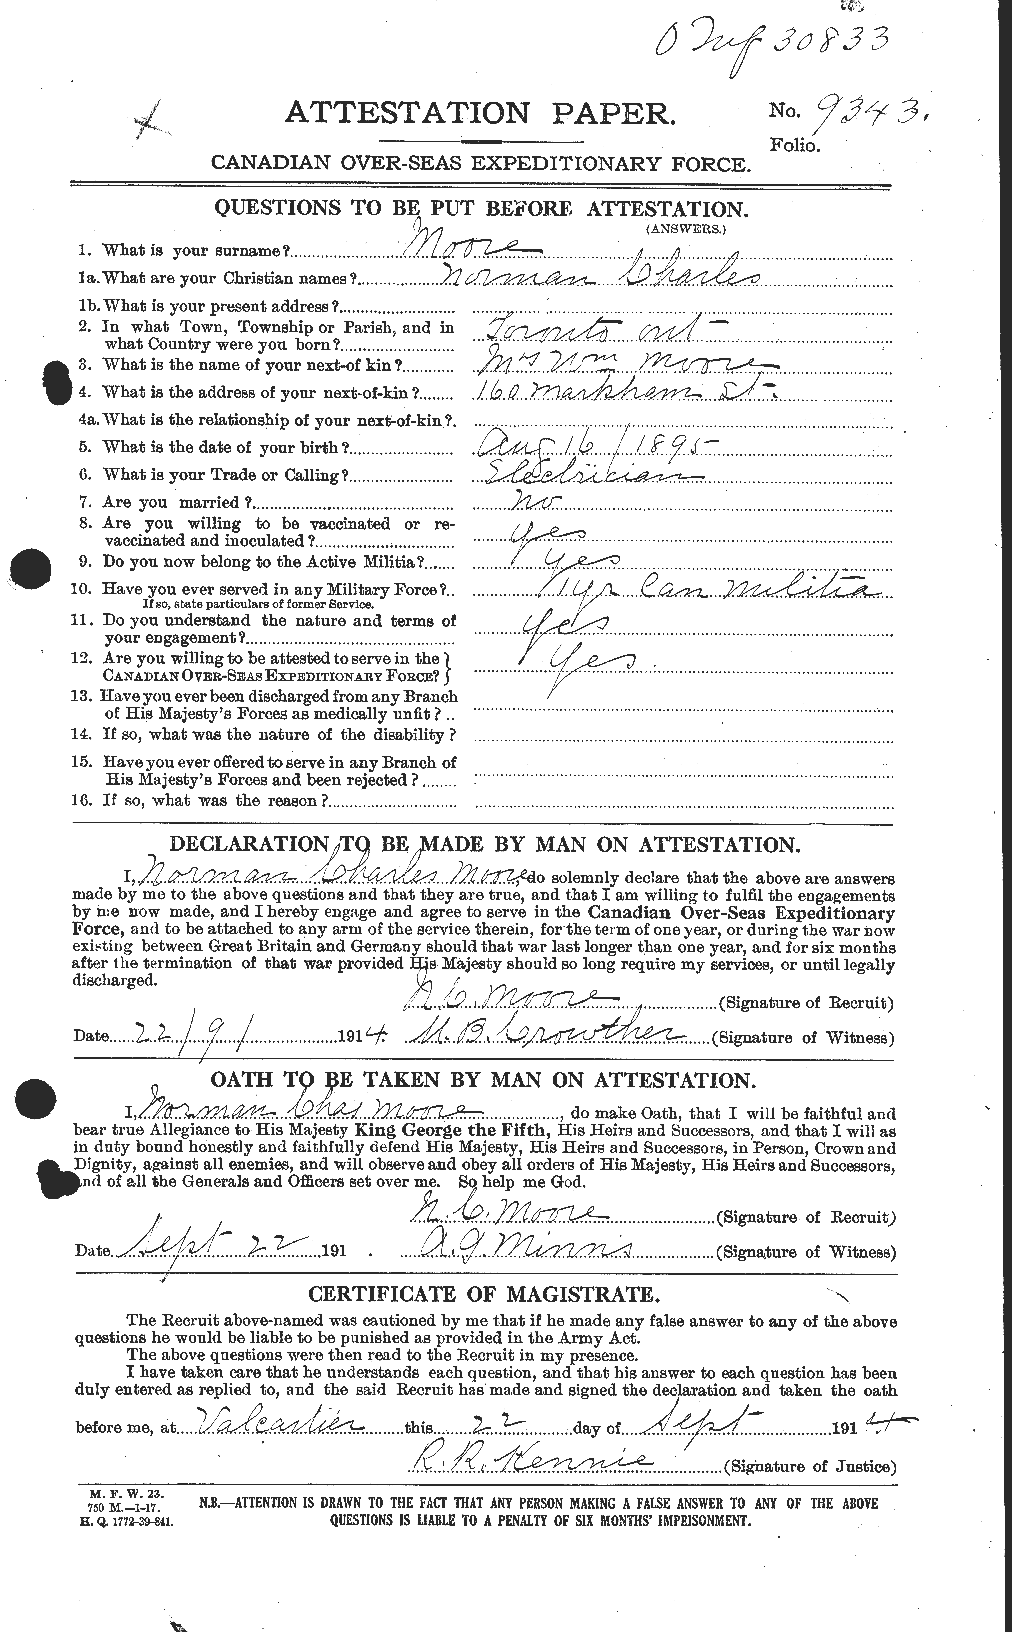 Personnel Records of the First World War - CEF 503462a